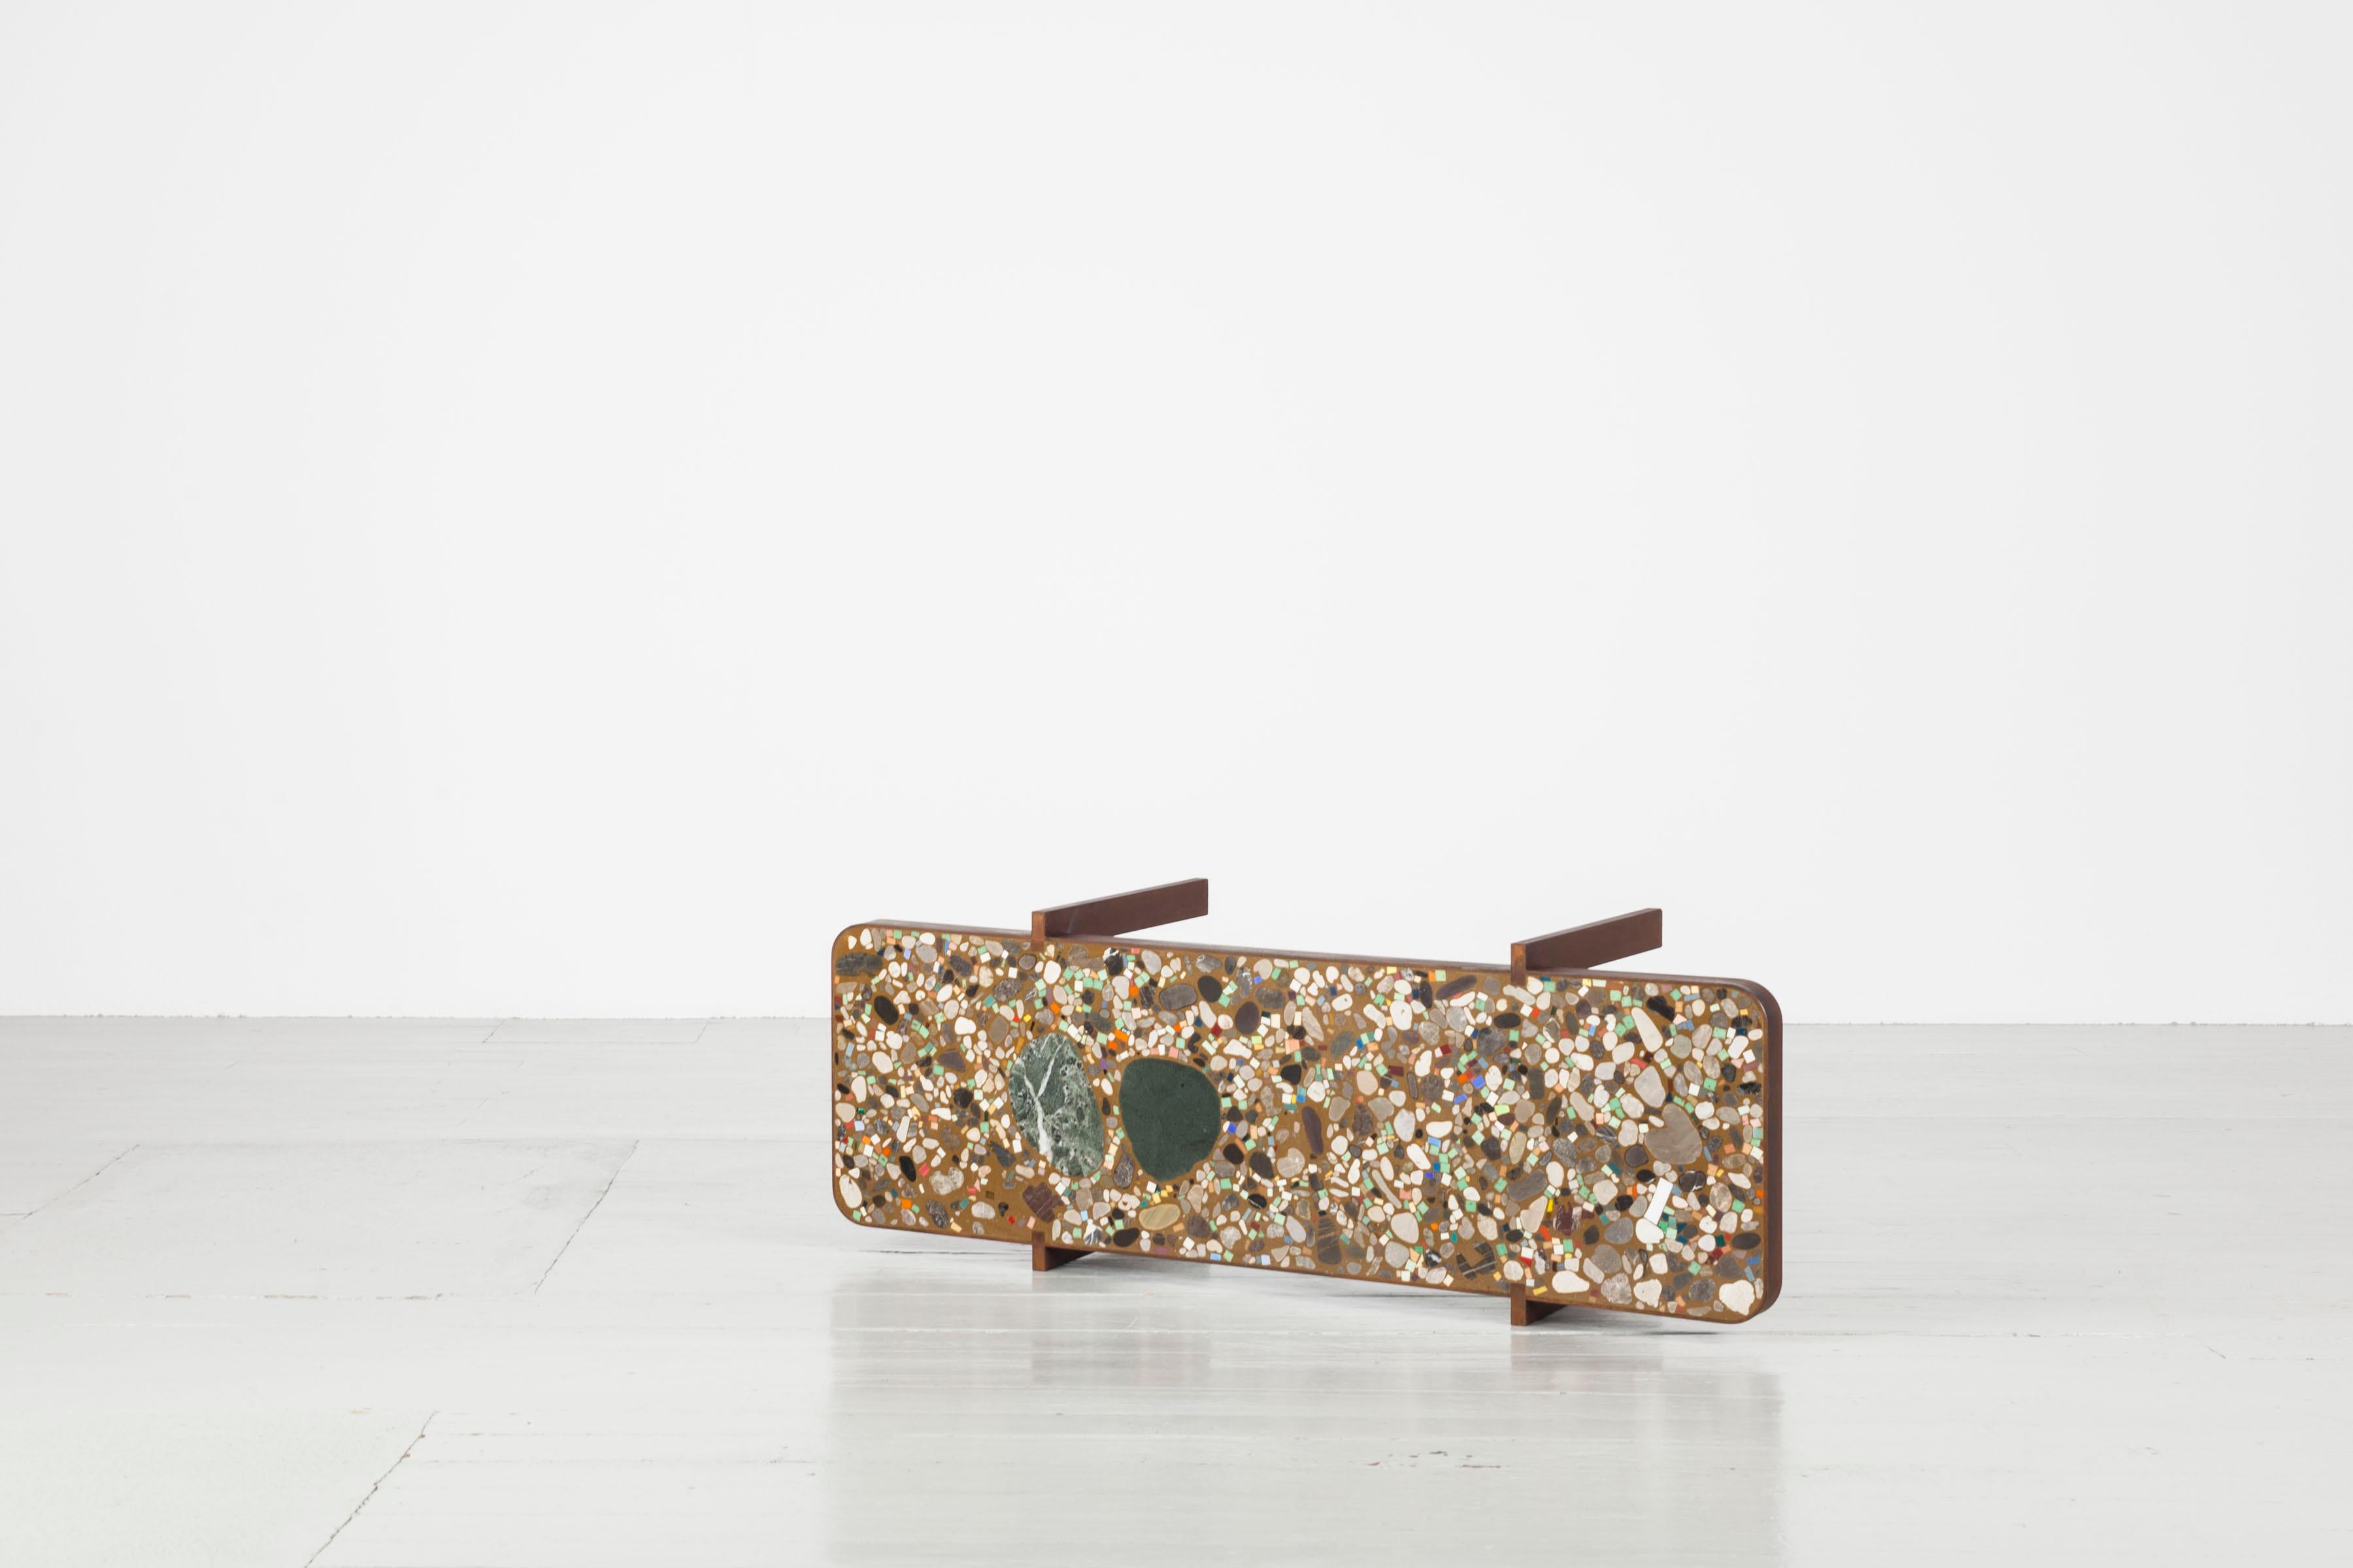 Felix Muhrhofer Contemporary Terrazzo Table with Corroded Steel Construction 8